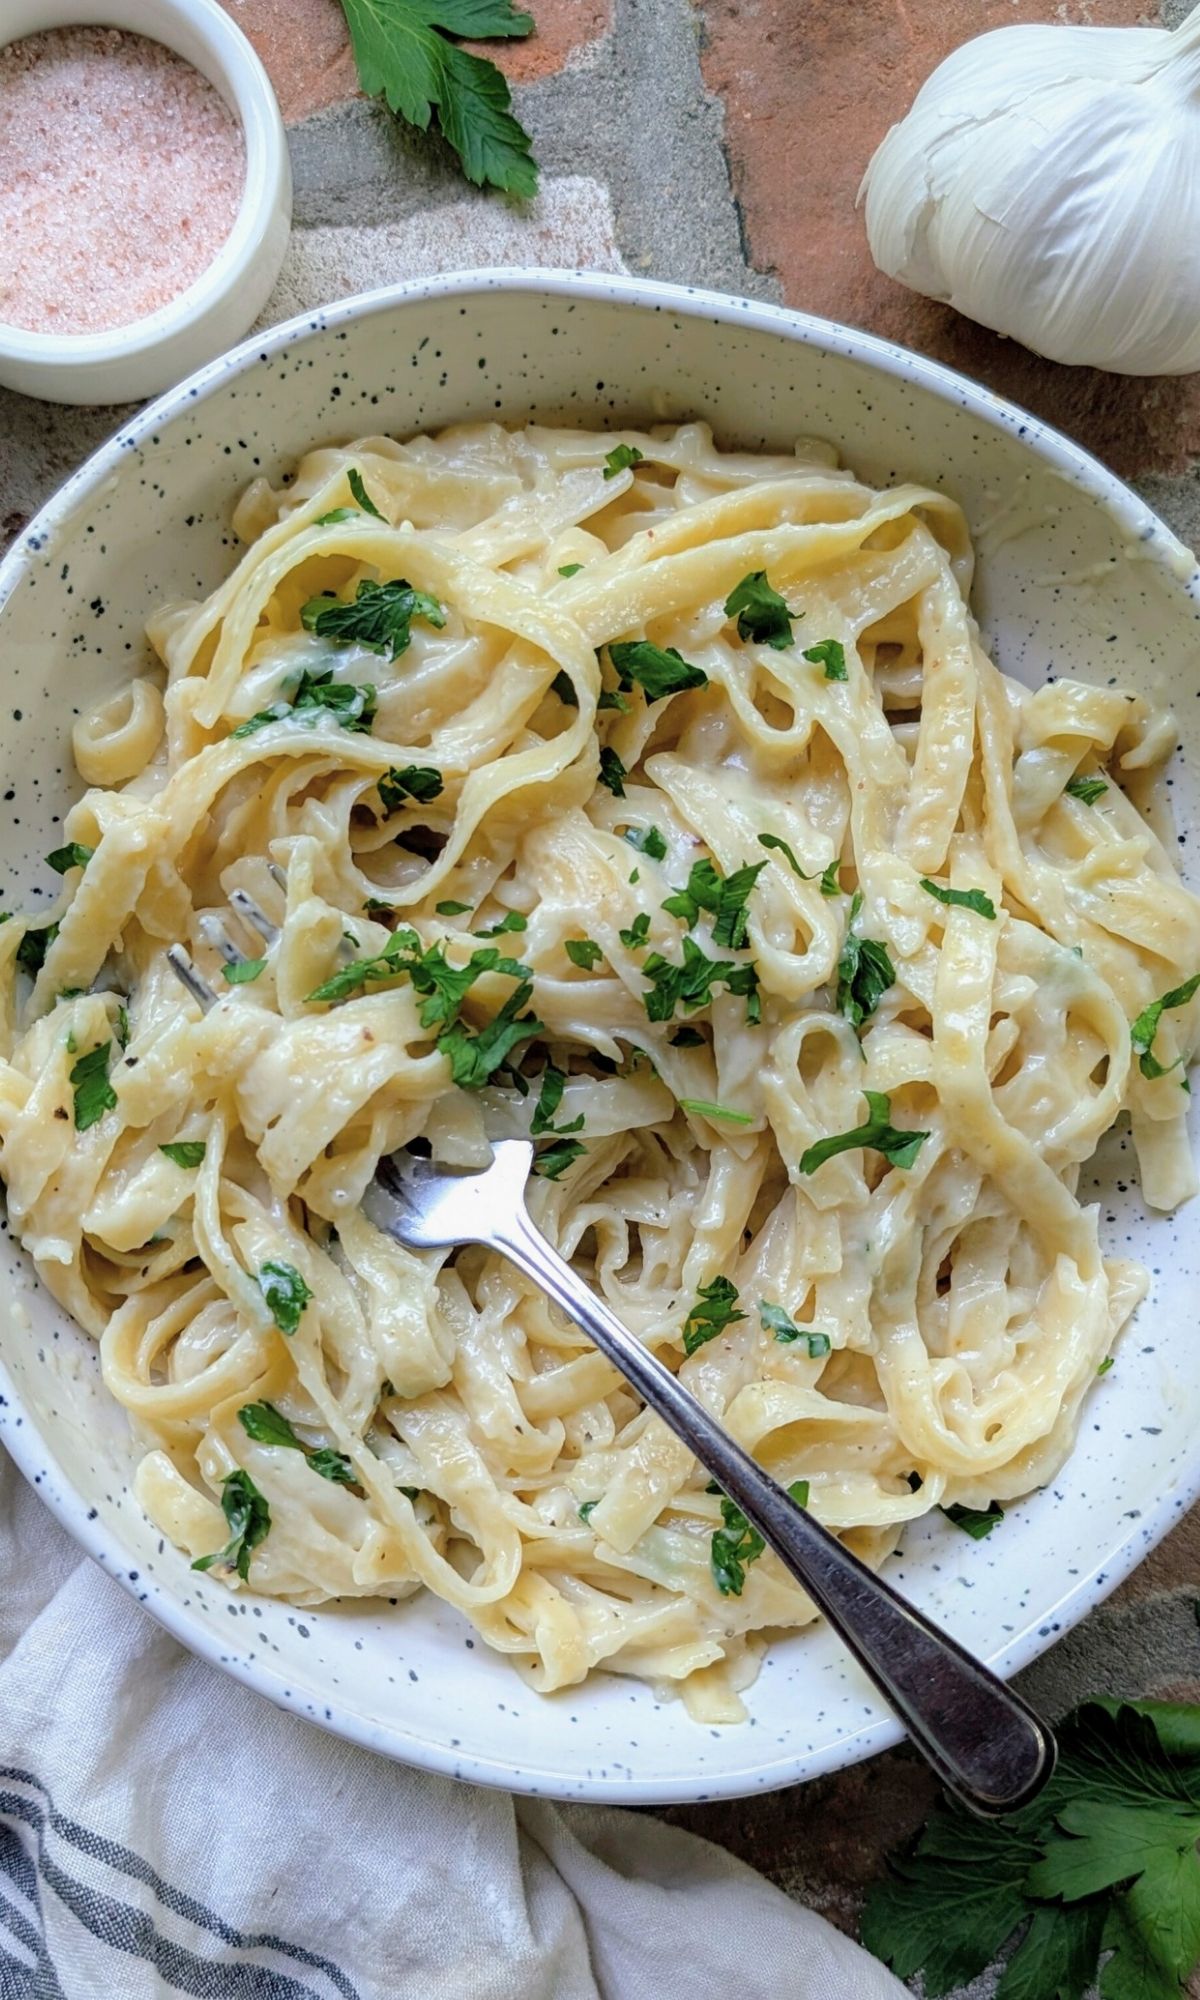 a fork twirling creamy oat milk pasta sauce topped with a fresh parsley garnish.